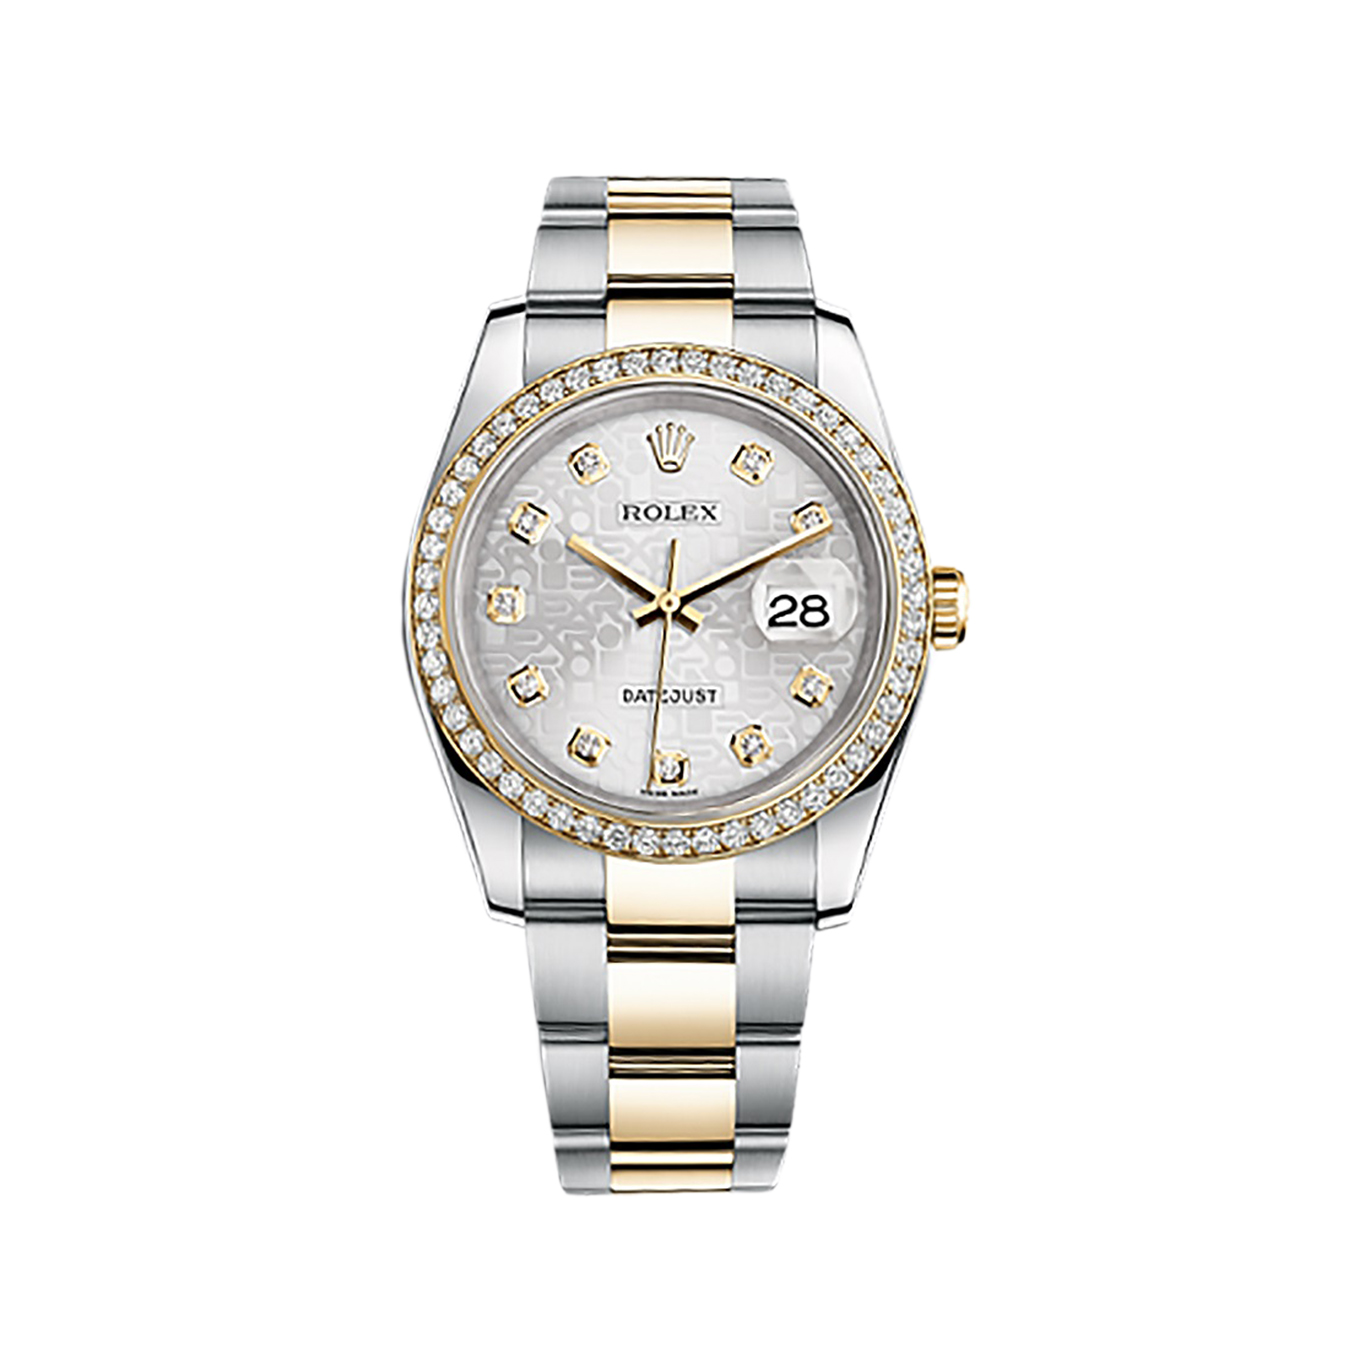 Datejust 36 116243 Gold & Stainless Steel Watch (Silver Jubilee Design Set with Diamonds)